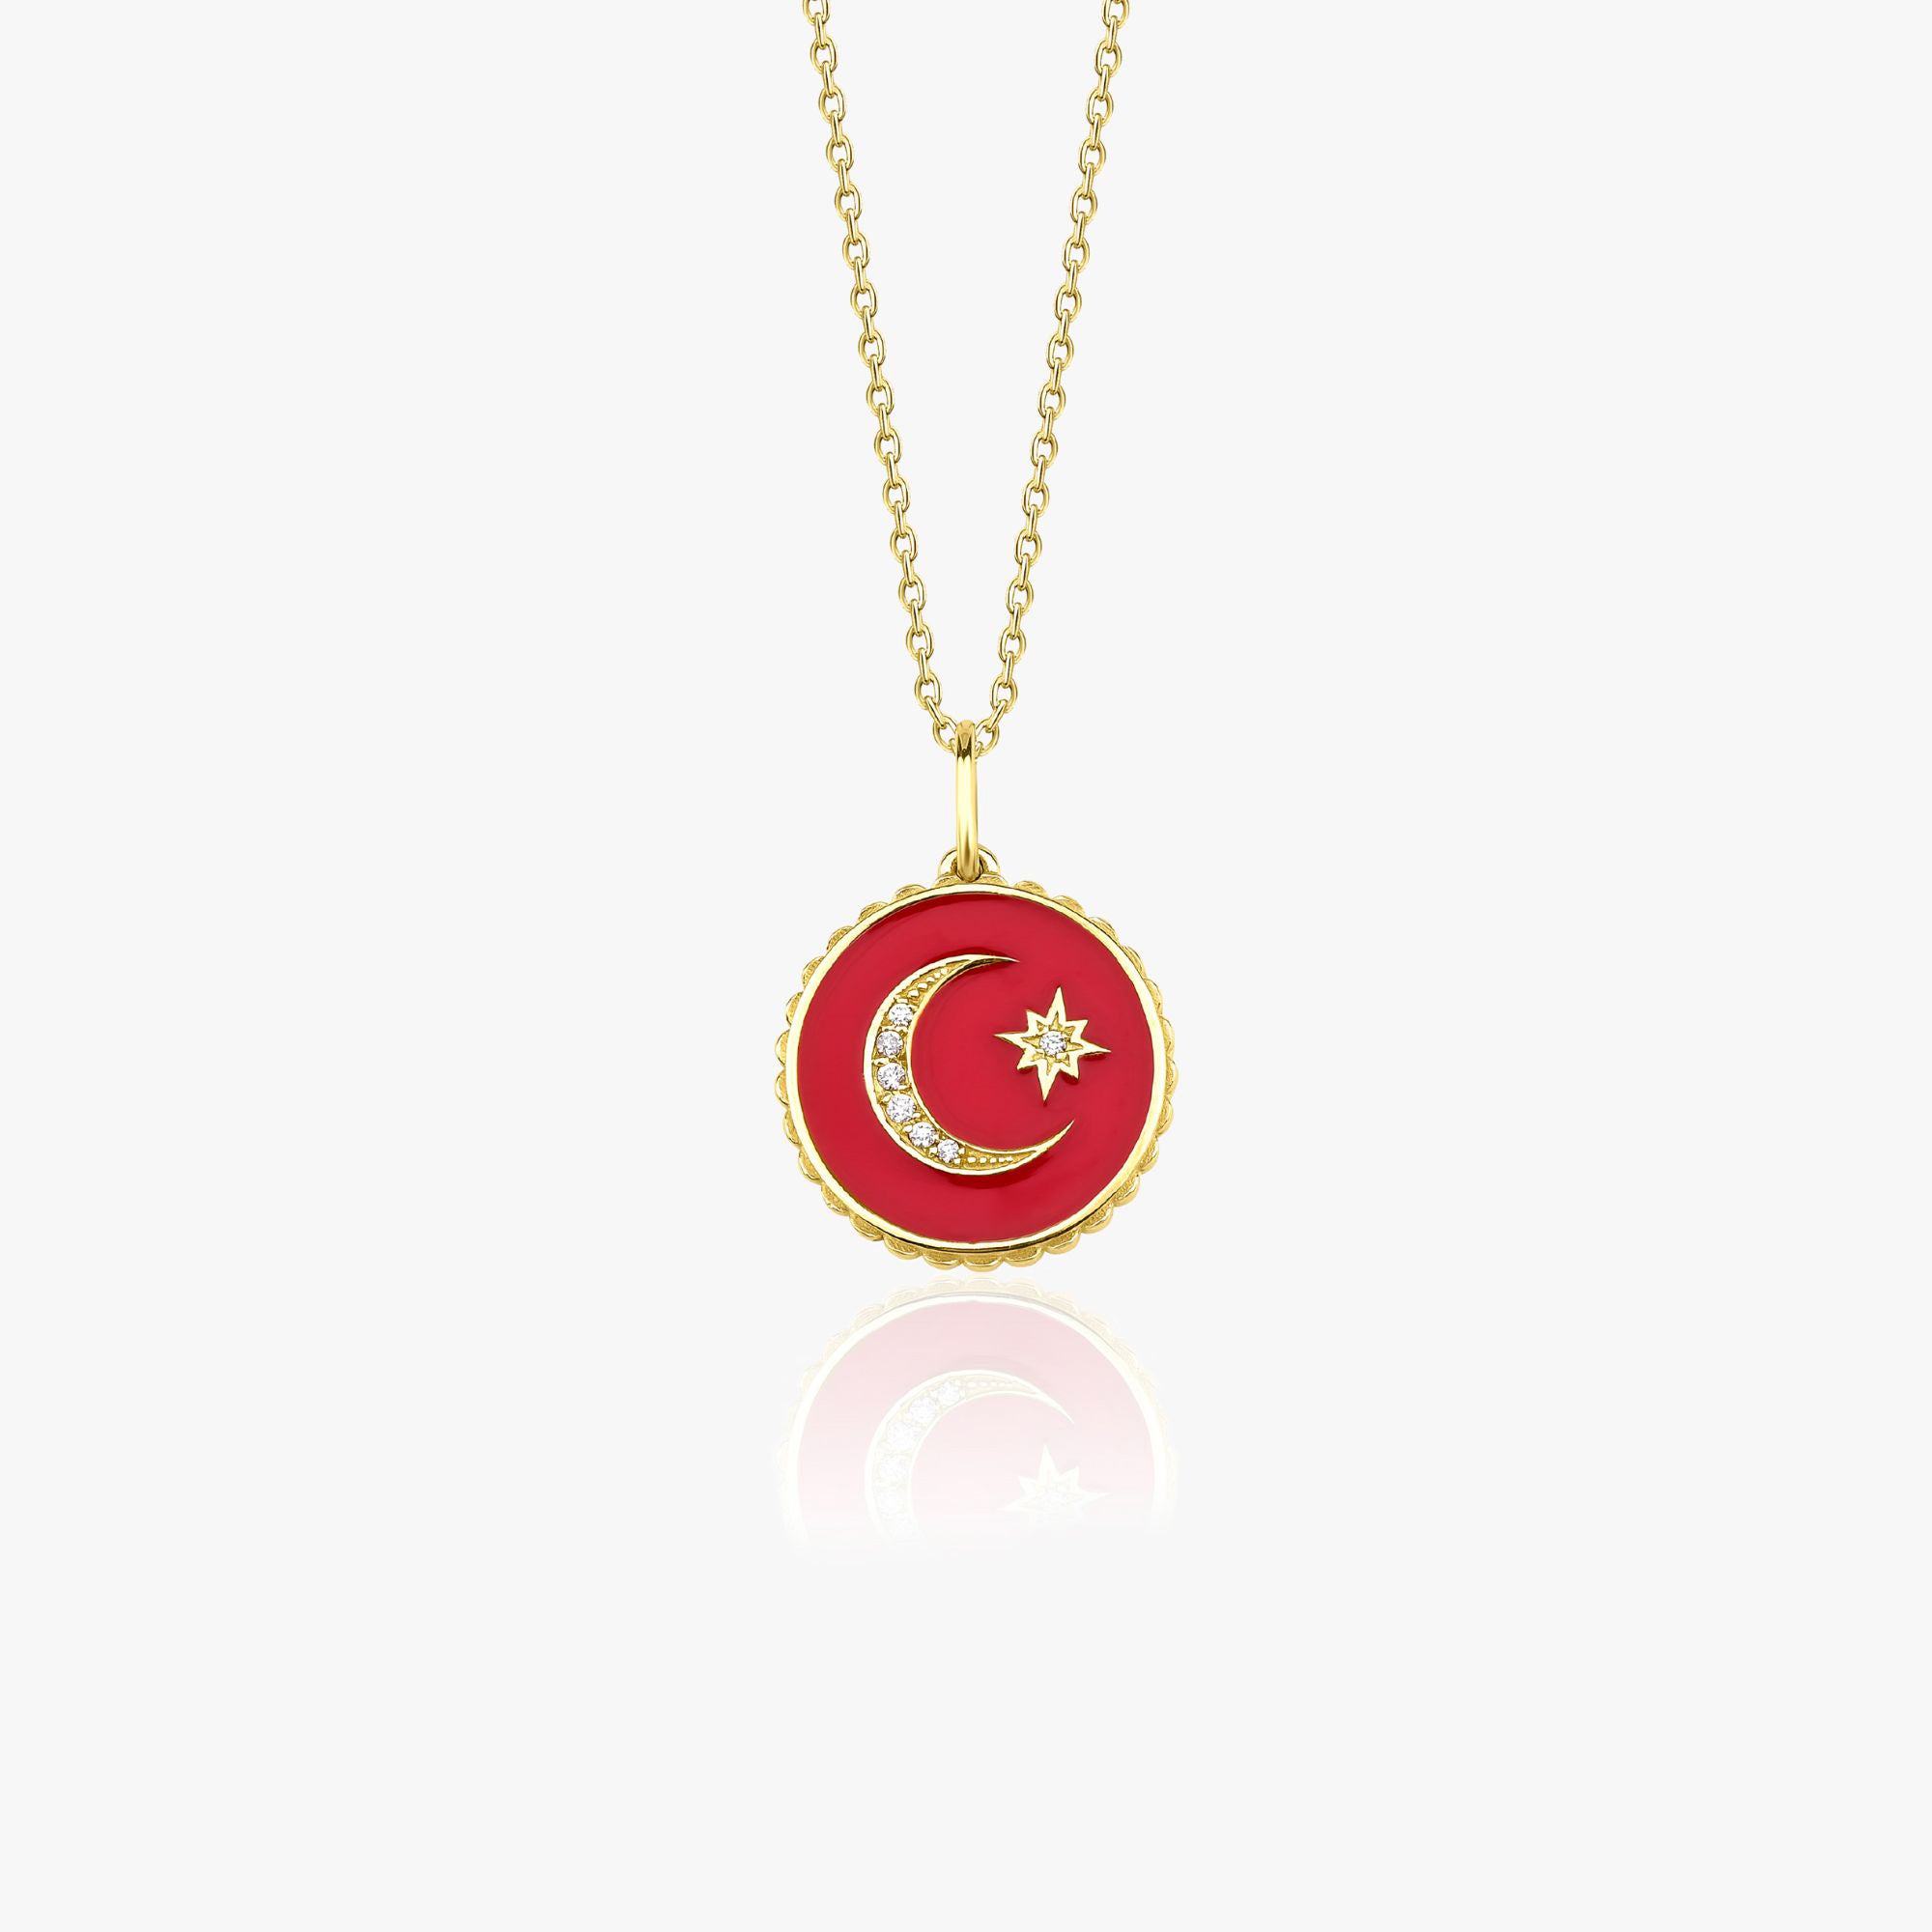 Diamond Crescent Moon Pendant Necklace Available in 14K and 18K Gold